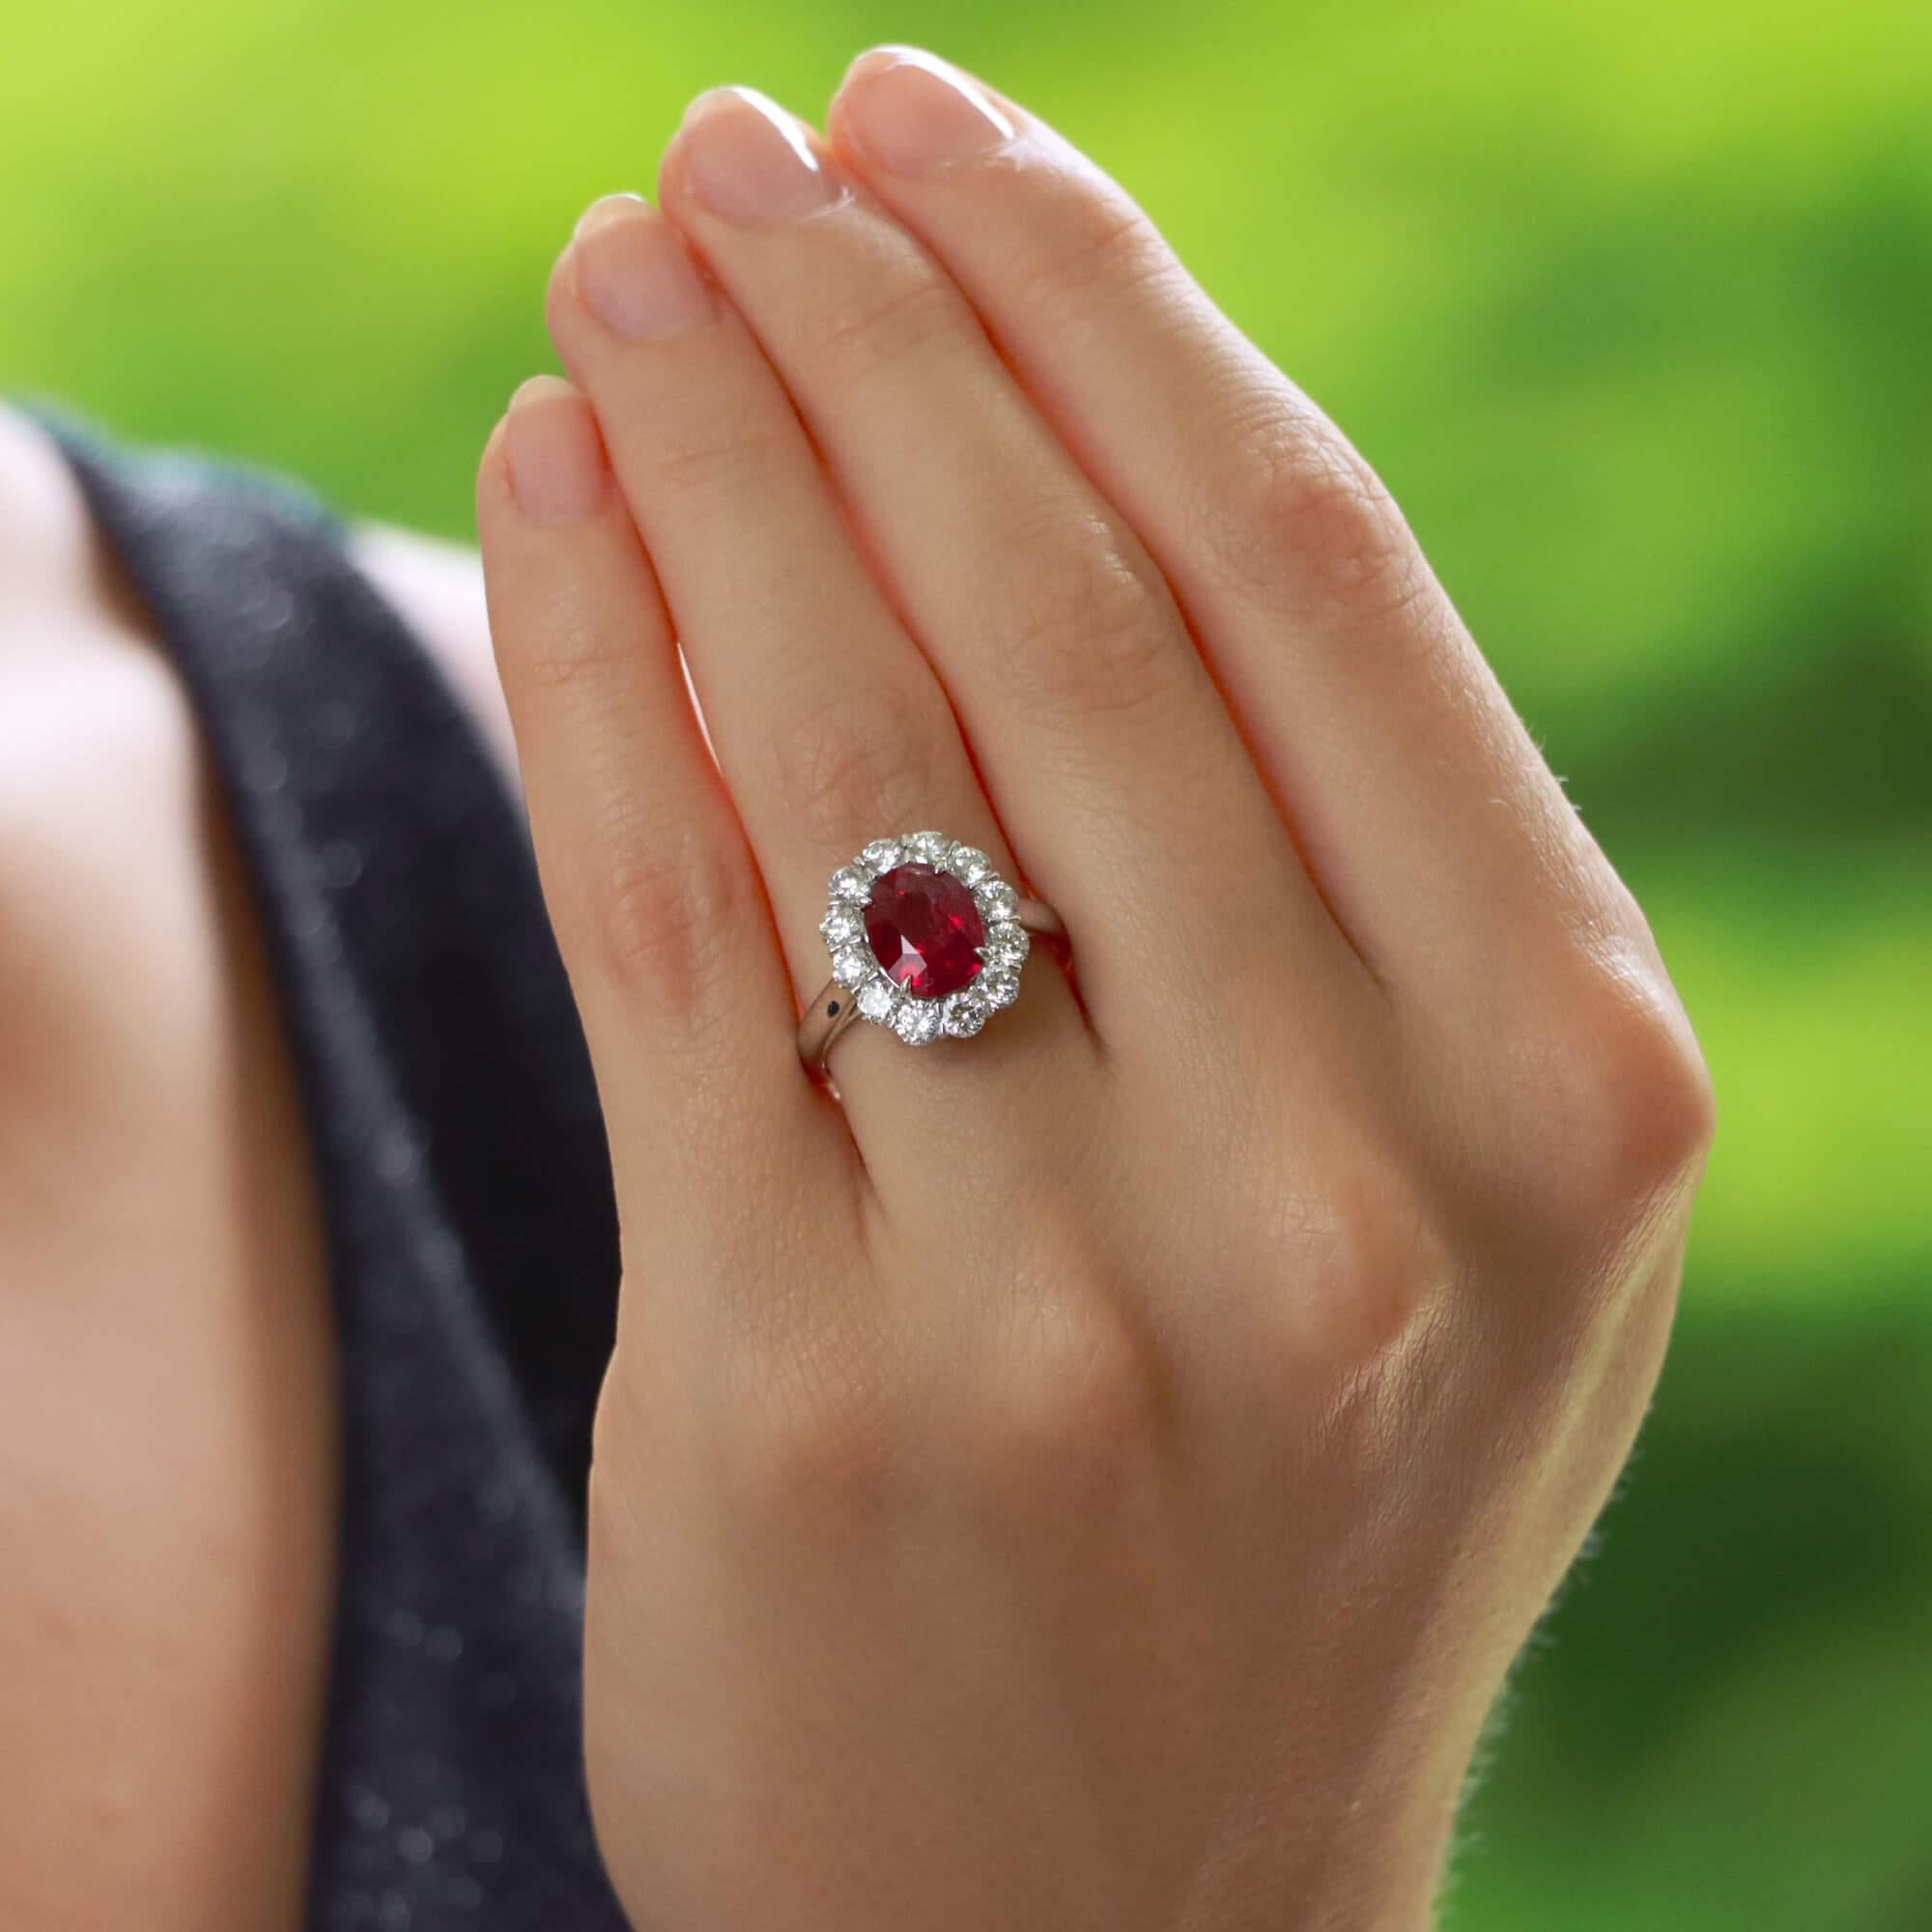 A truly stunning ruby and diamond cluster ring set in platinum.

The piece is centrally set with an astounding 2.94 carat oval cut ruby which is four claw set. The ruby has a fantastic vibrancy to it and is surrounded by a cluster of 12 round